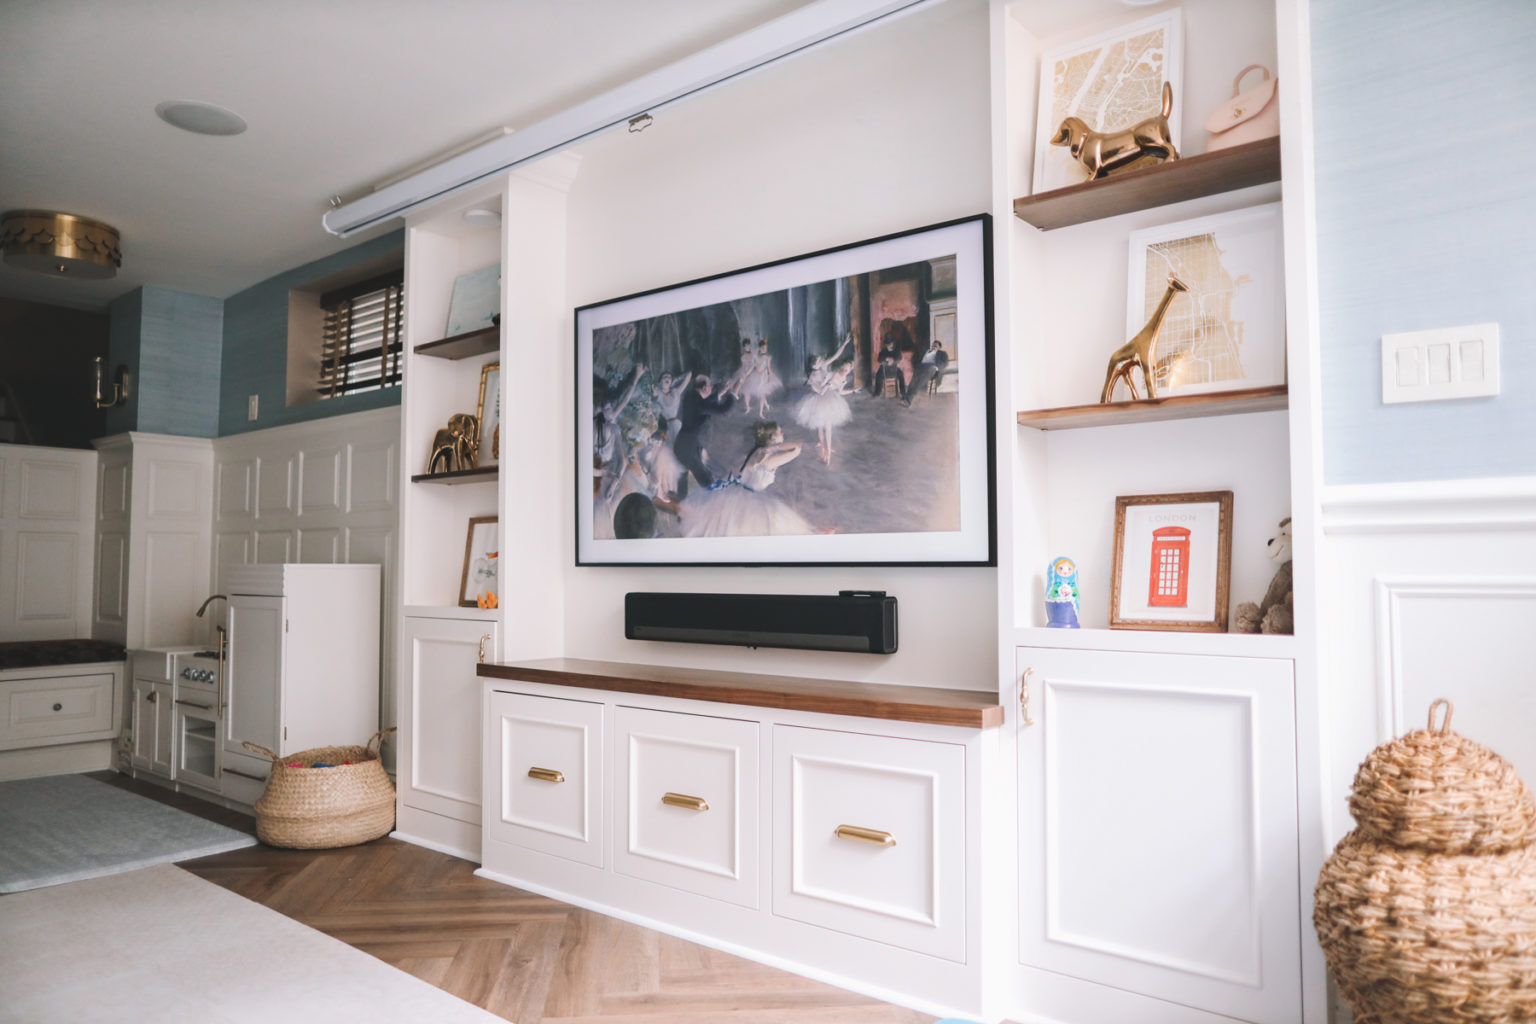 Samsung Frame TV Review by Mitch Kelly in the City